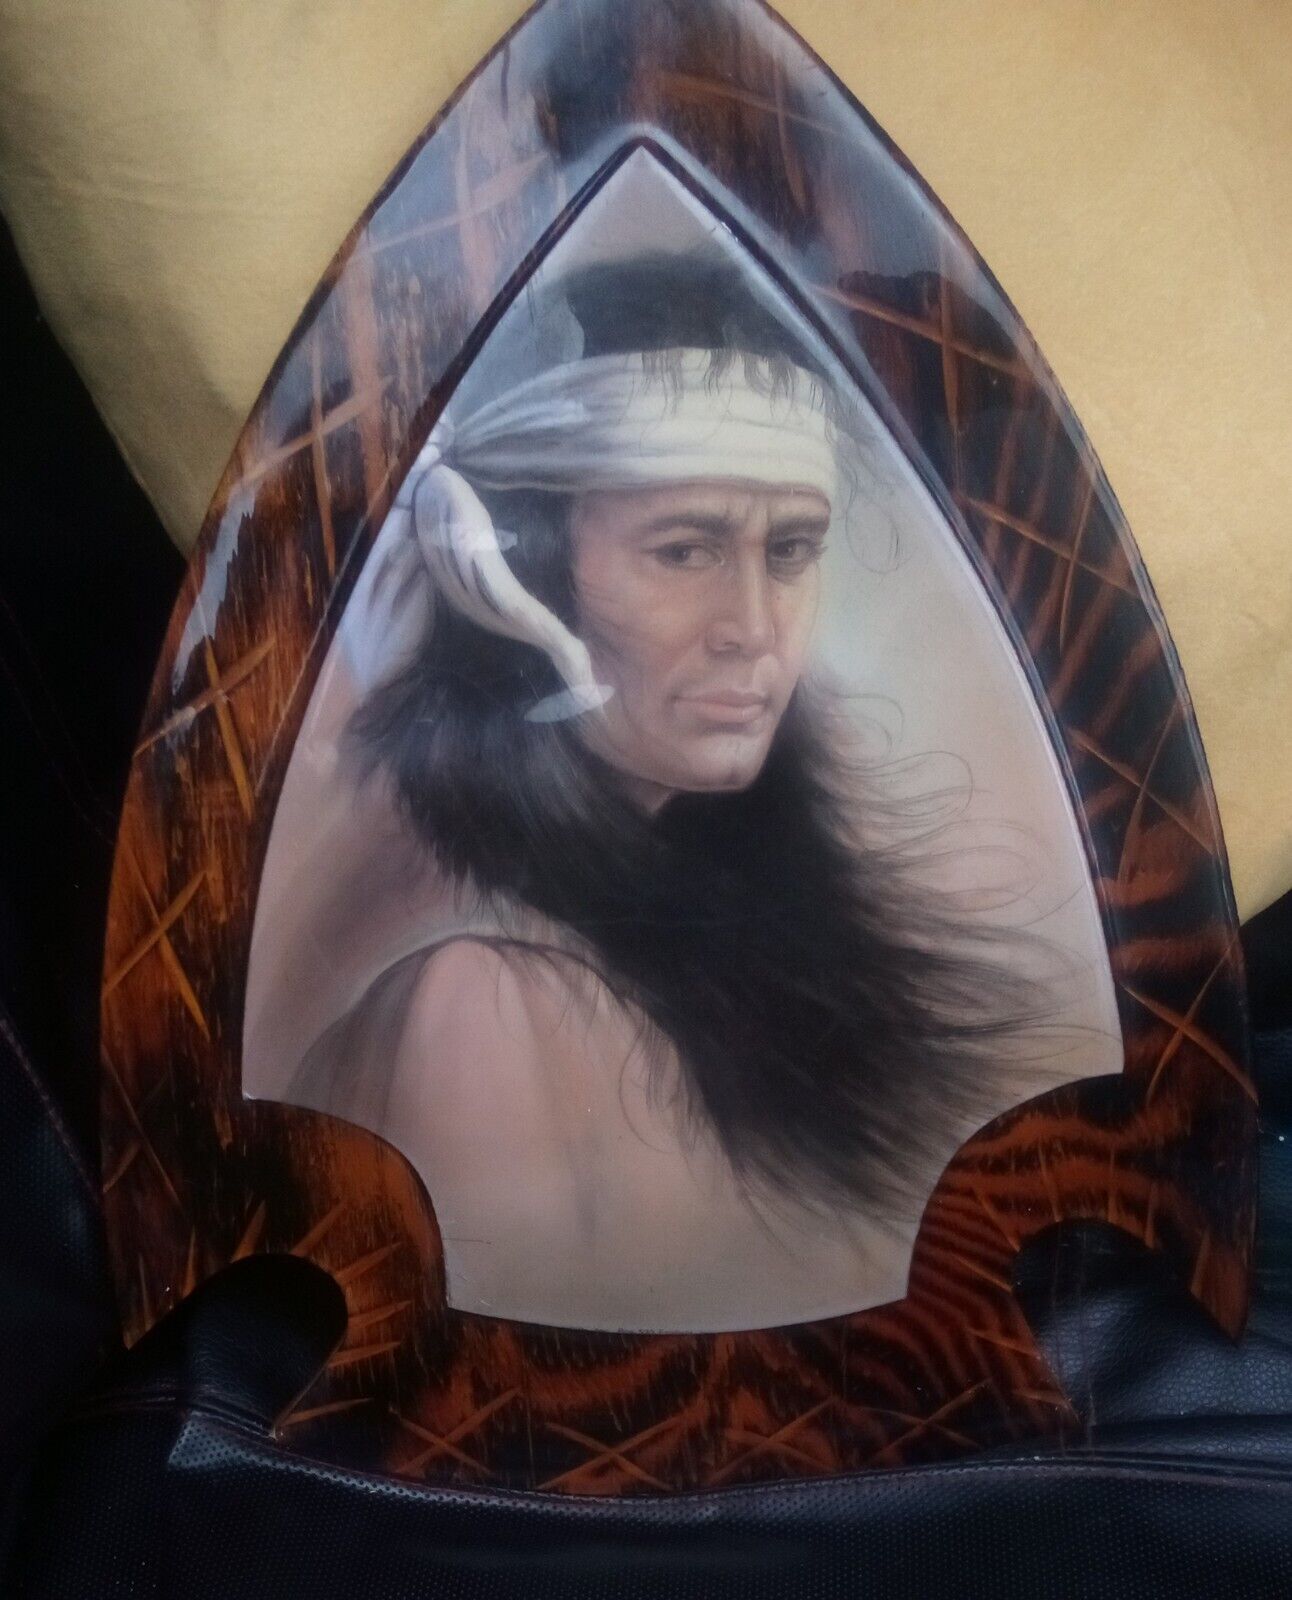 Arrowhead Plaque With Native American Male Image 11x8